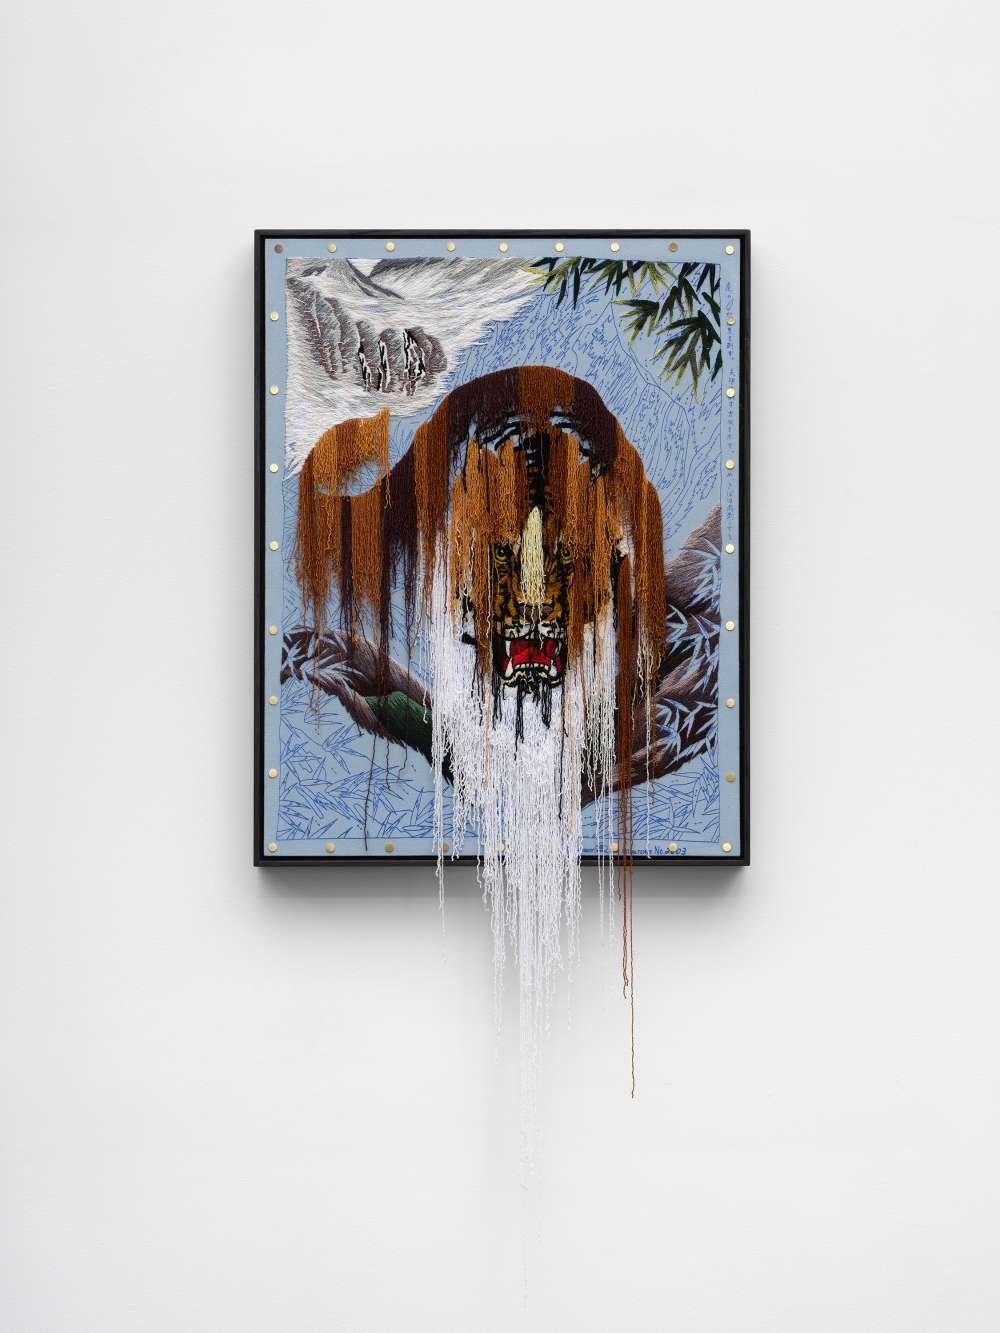 A mixed-media artwork hanging on a white gallery wal